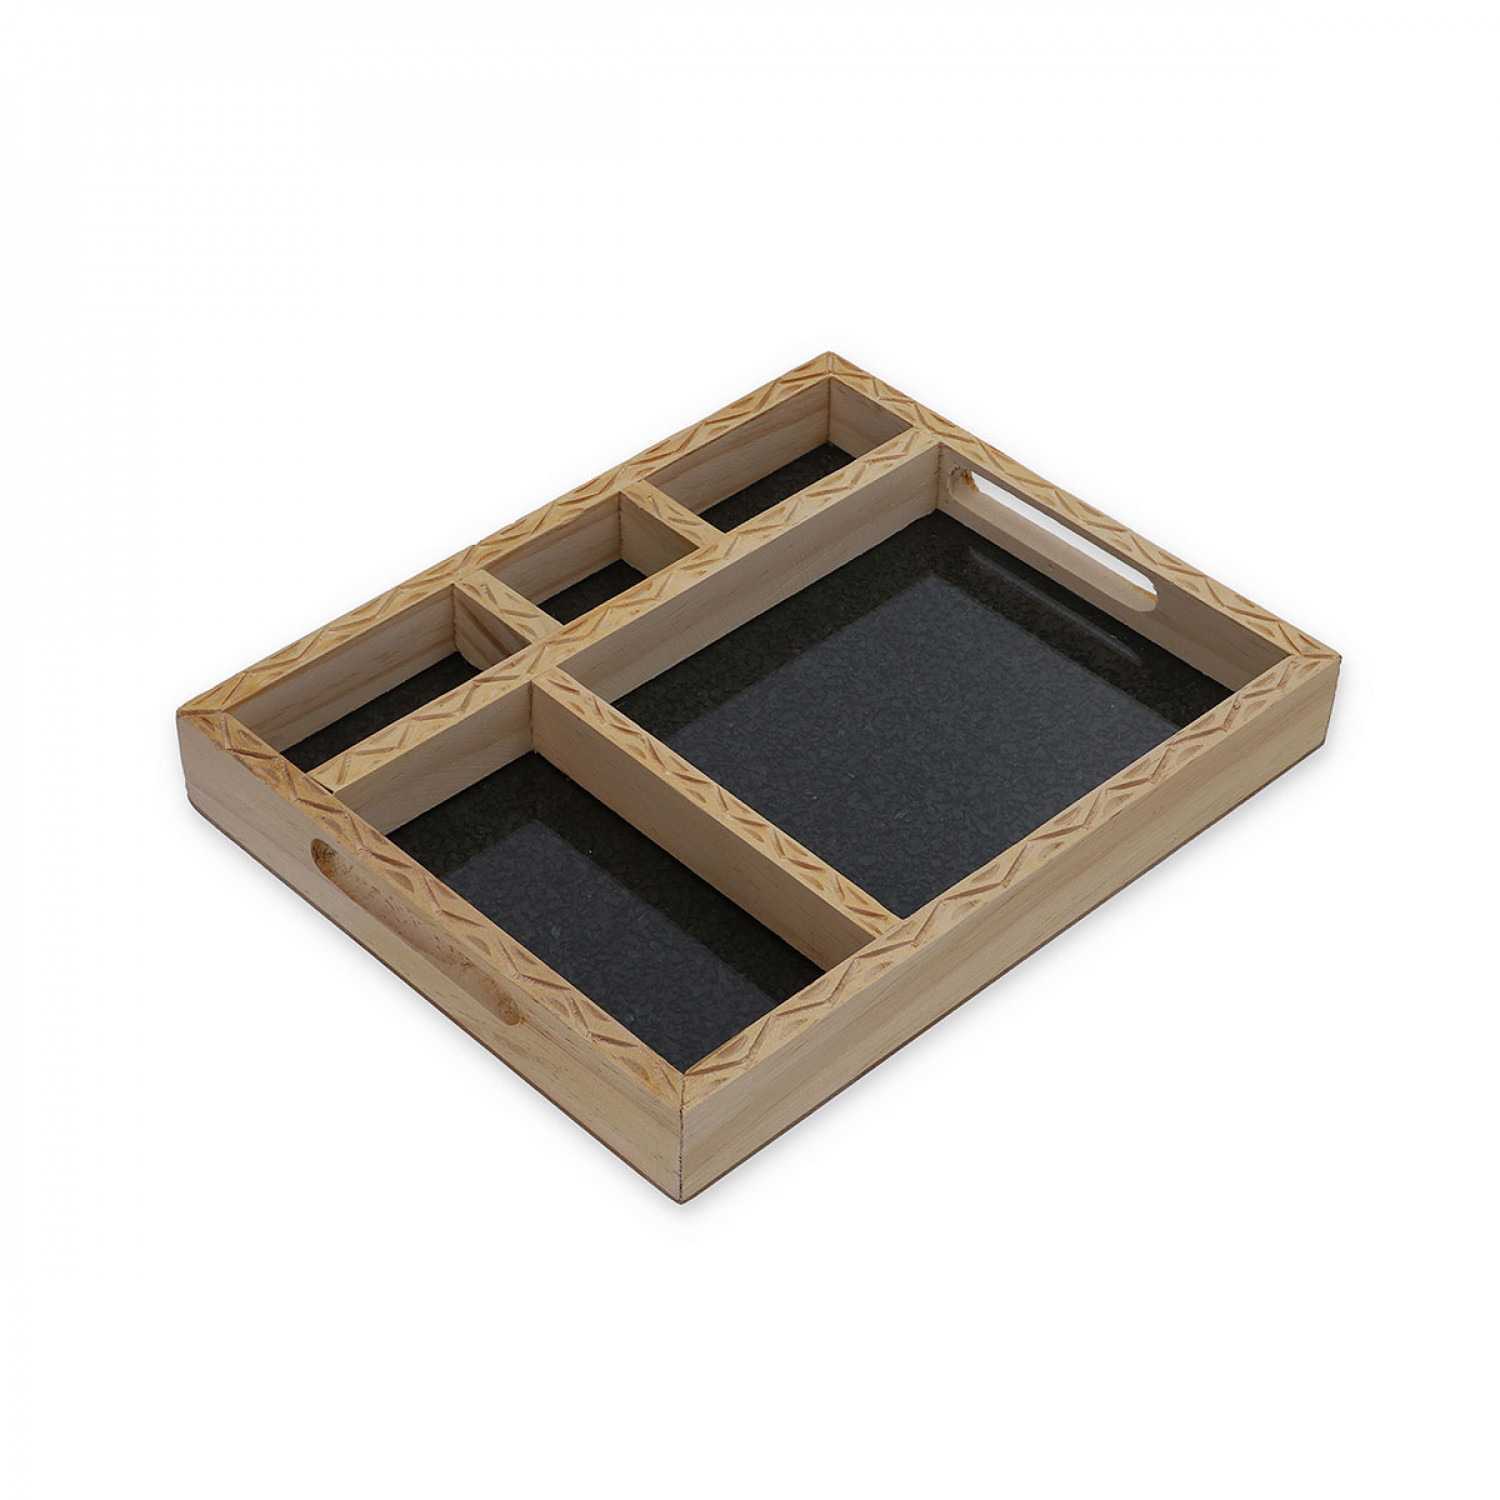 Pine Wood Gemstones Bed Side Table Organiser Tray with Handcarving Border